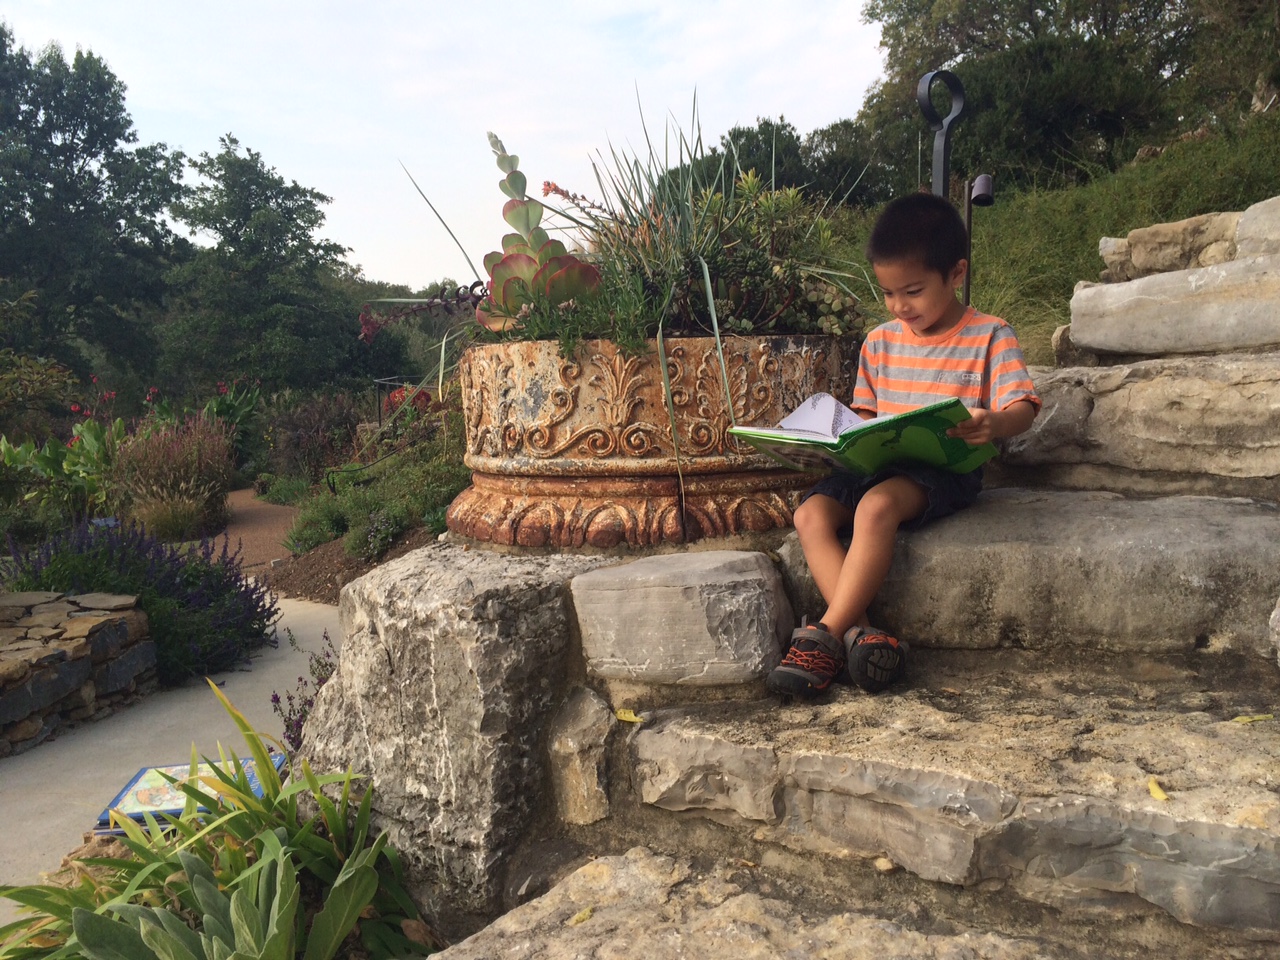 Little boy reading a book in the gardens